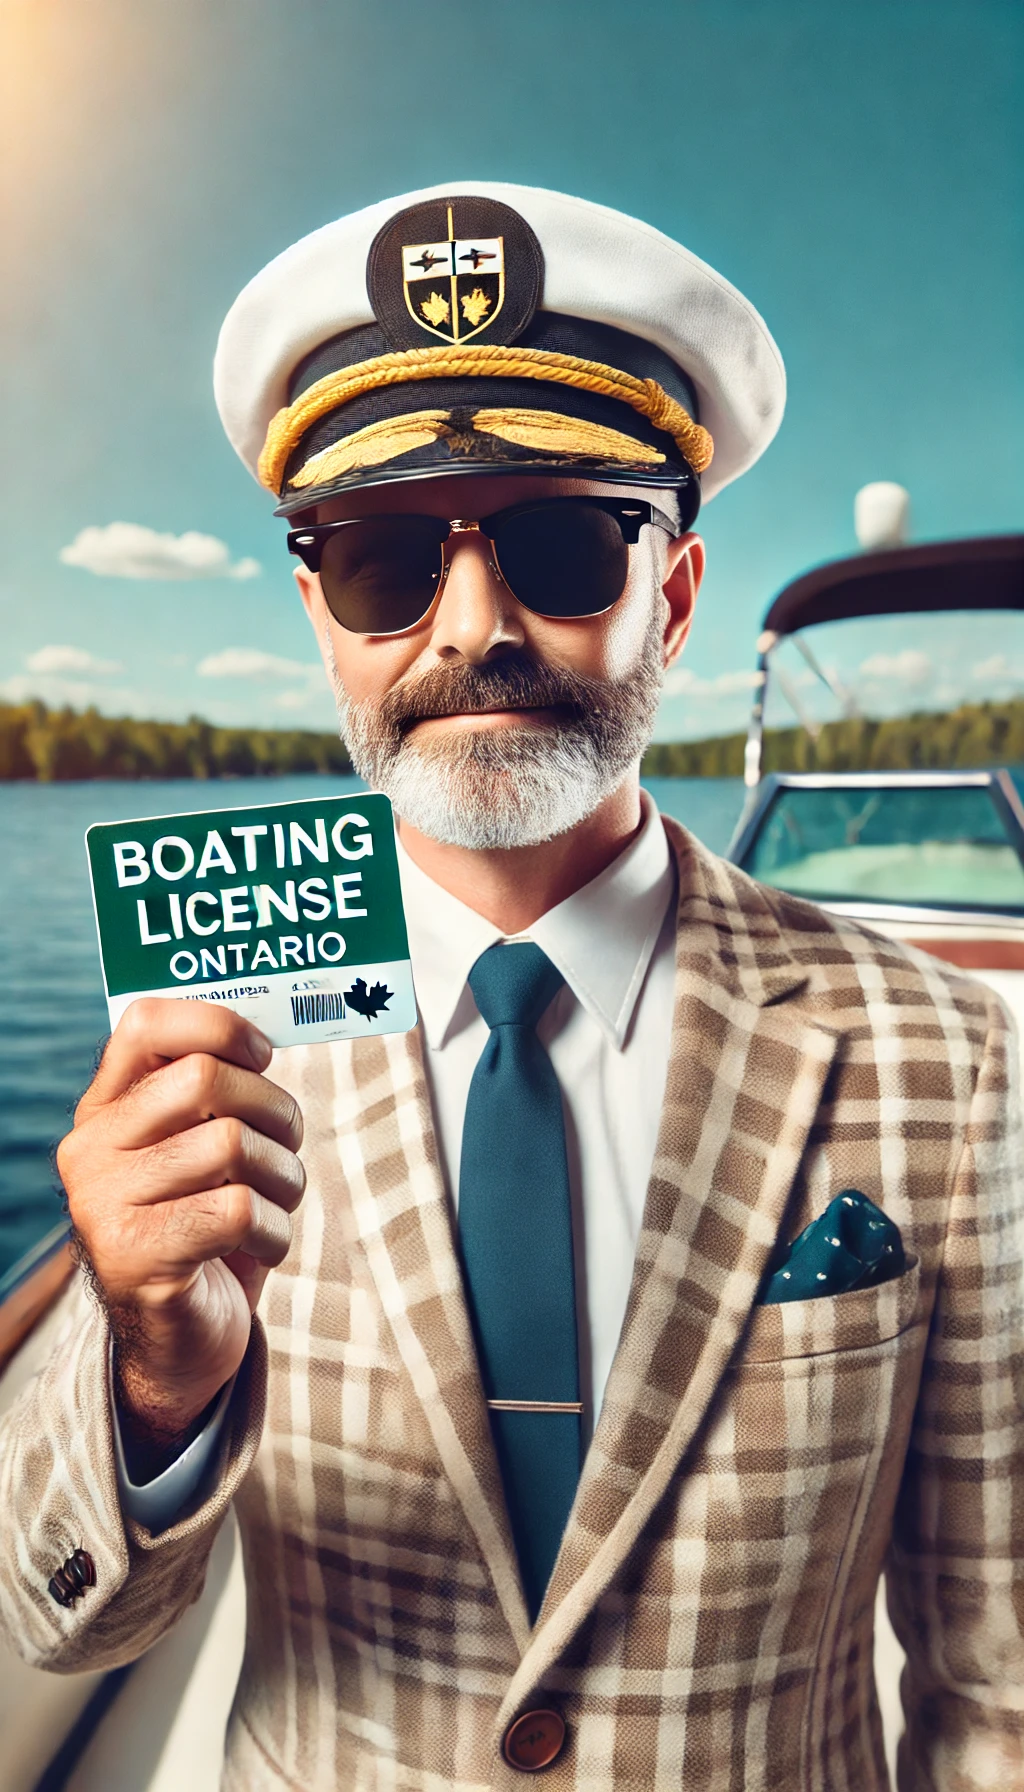 Boating License Ontario: Everything You Need to Know